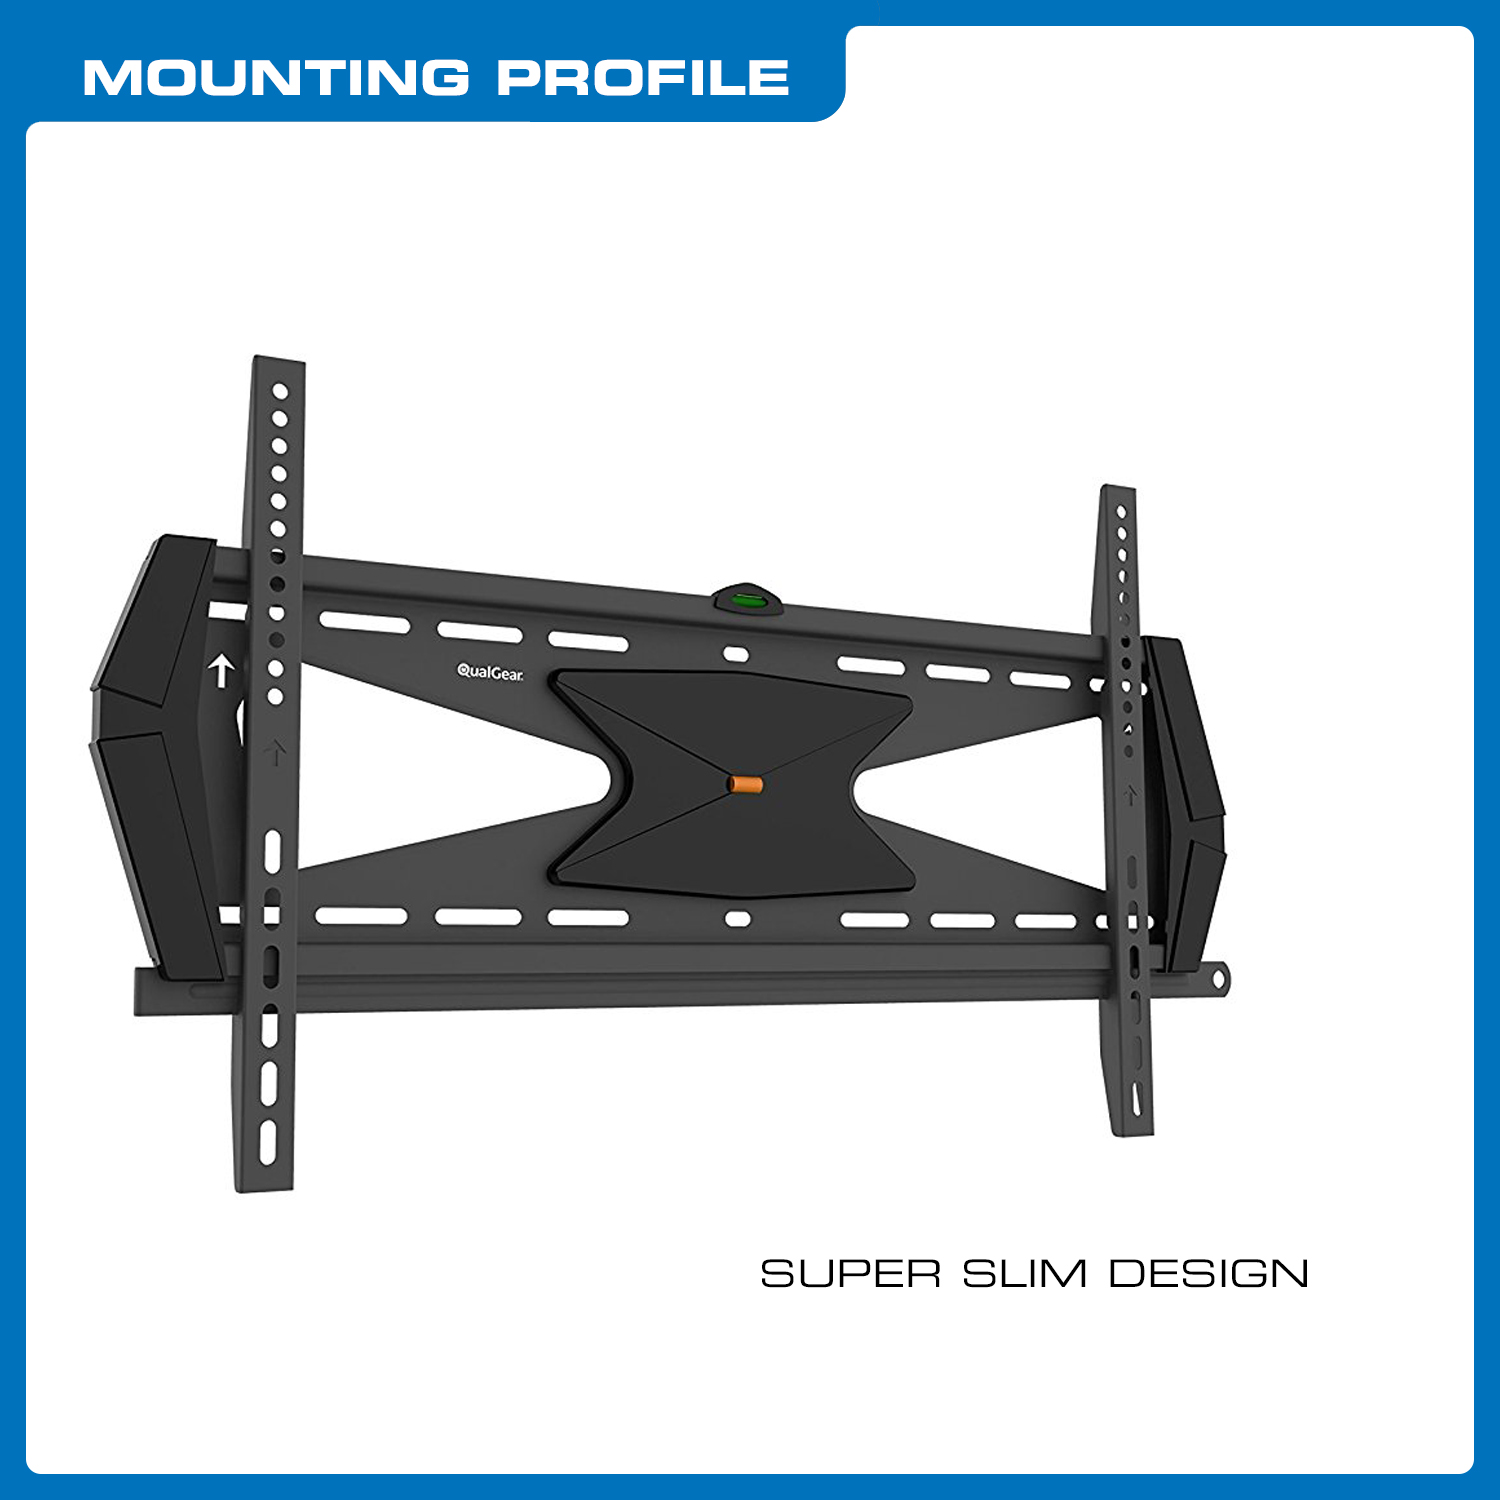 QualGear Heavy Duty Fixed TV Wall Mount for 37 to 70 Inch Flat Panel and Curved TVs, Black (QG-TM-030-BLK) [UL Listed]